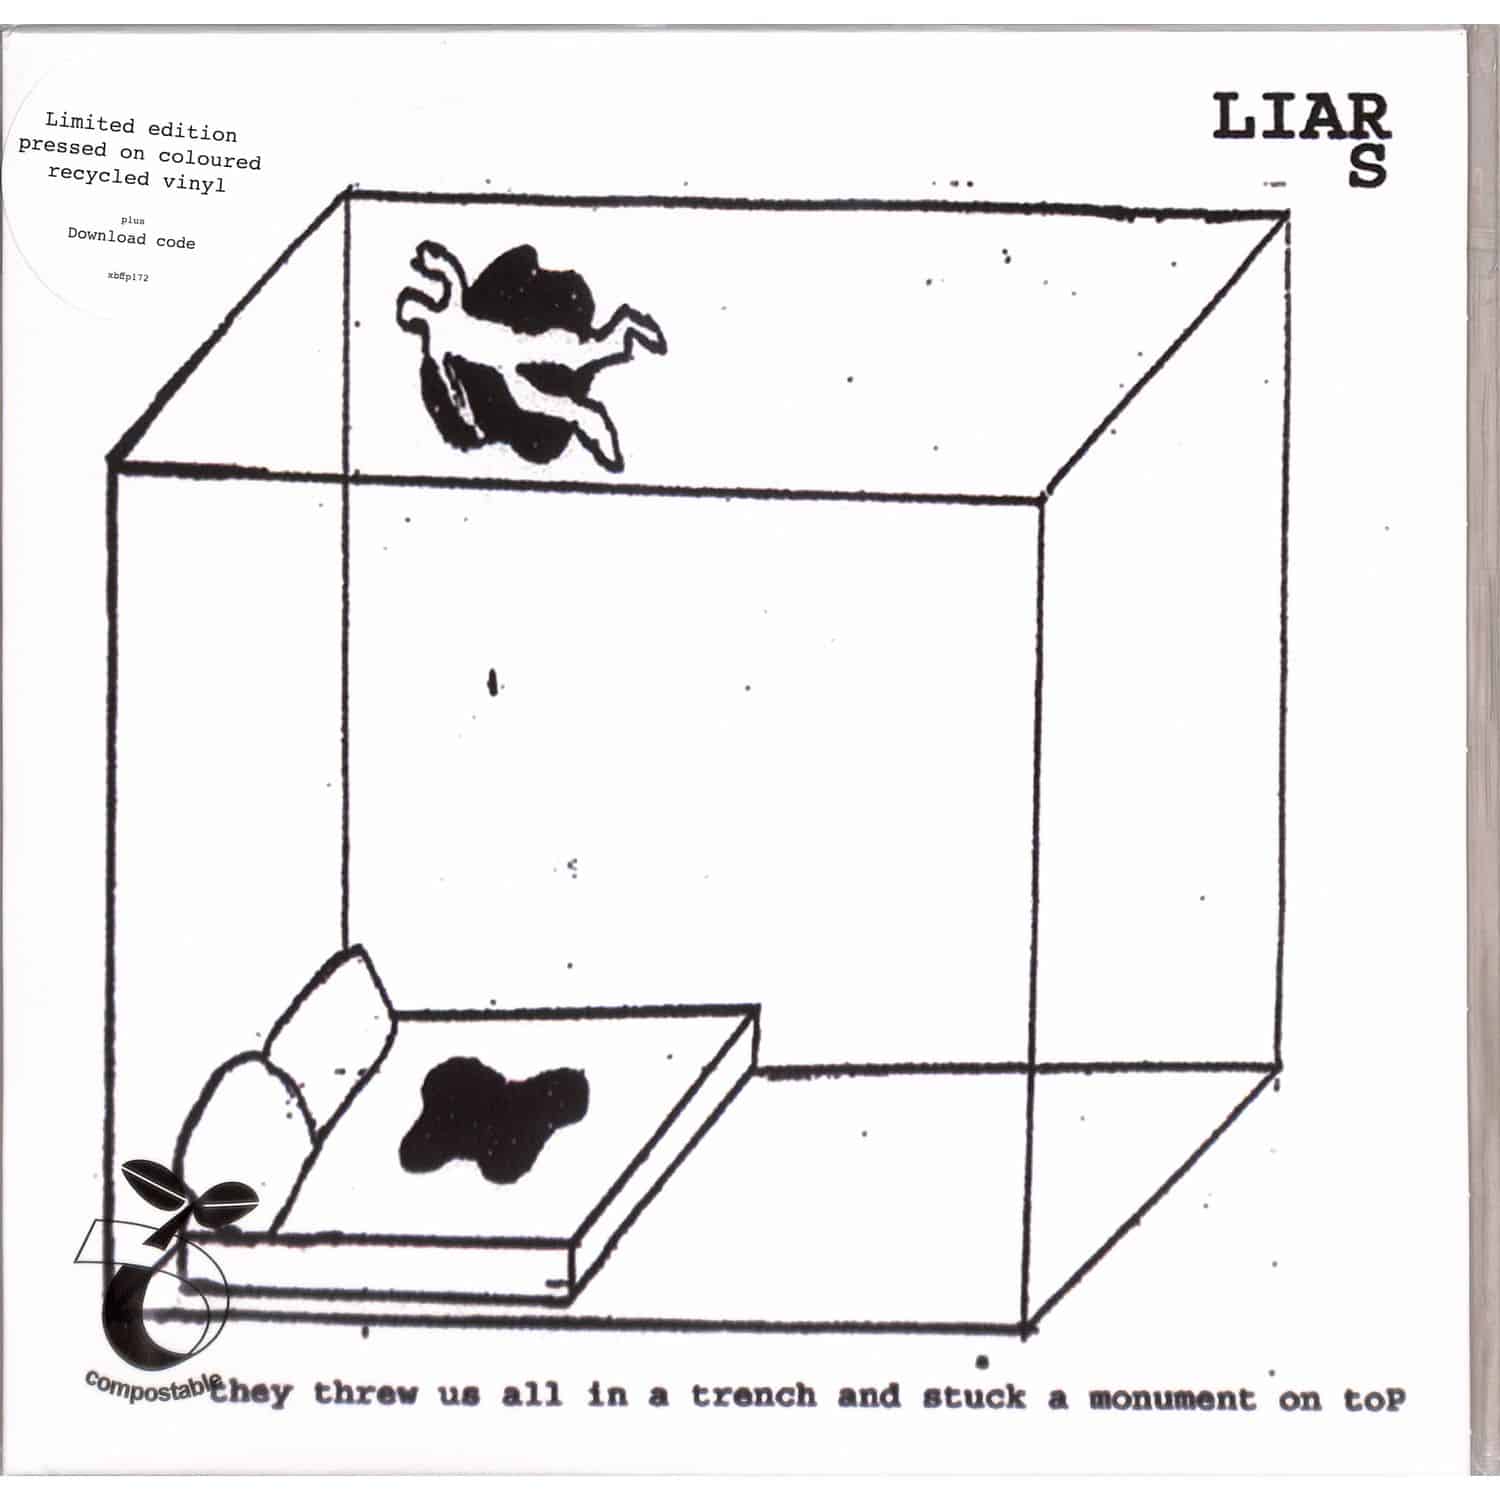 Liars - THEY THREW US ALL IN A TRENCH AND STUCK A MONUMENT 